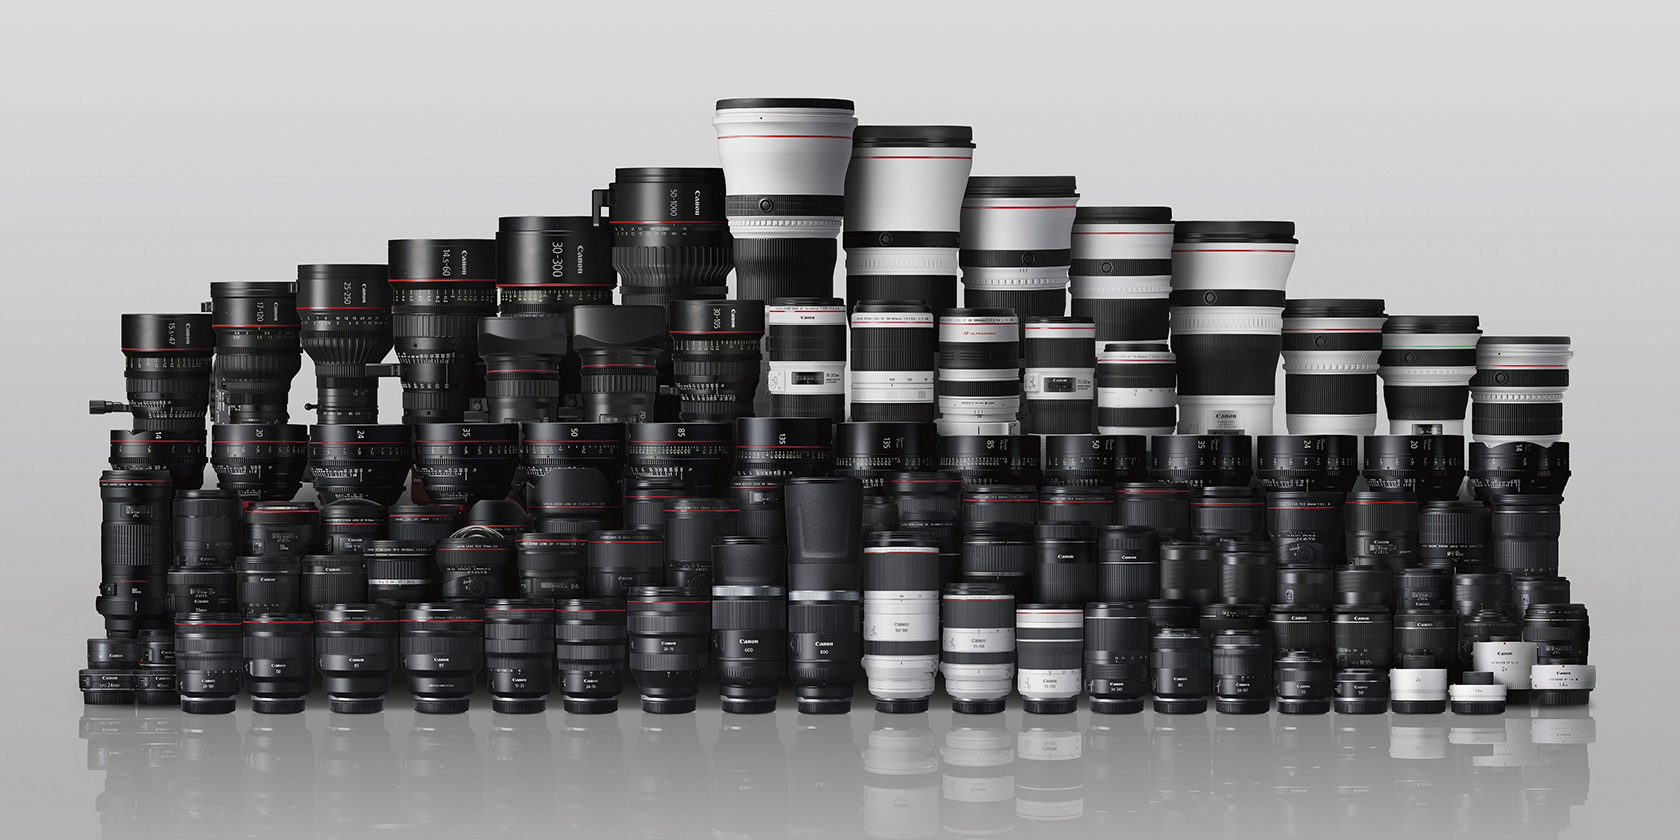 A wall of camera lenses produced by Canon